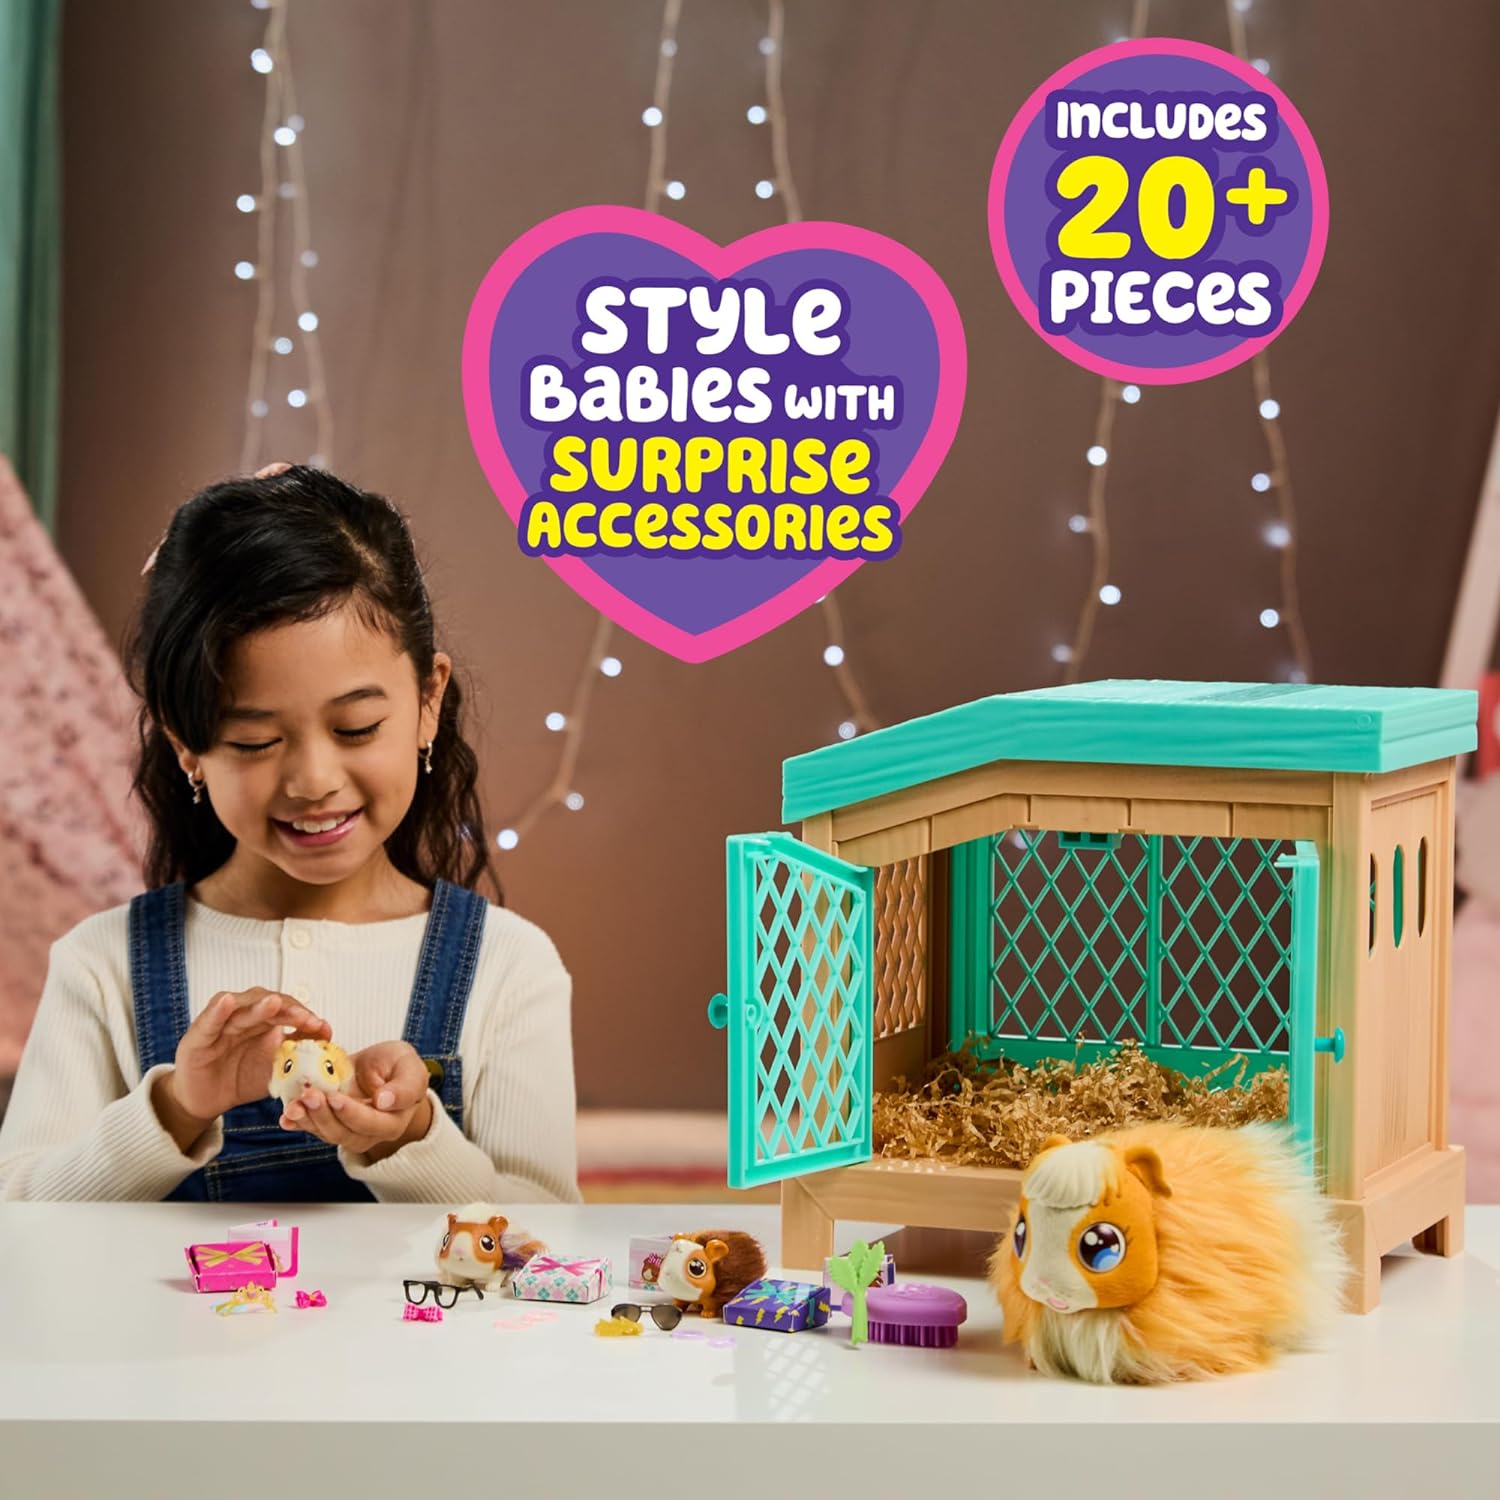 Little Live Pets - Mama Surprise | Soft, Interactive Guinea Pig and her Hutch, and her 3 Babies. 20+ Sounds & Reactions. for Kids Ages 4+, Multicolor, 7.8 x 11.93 x 11.38 inches